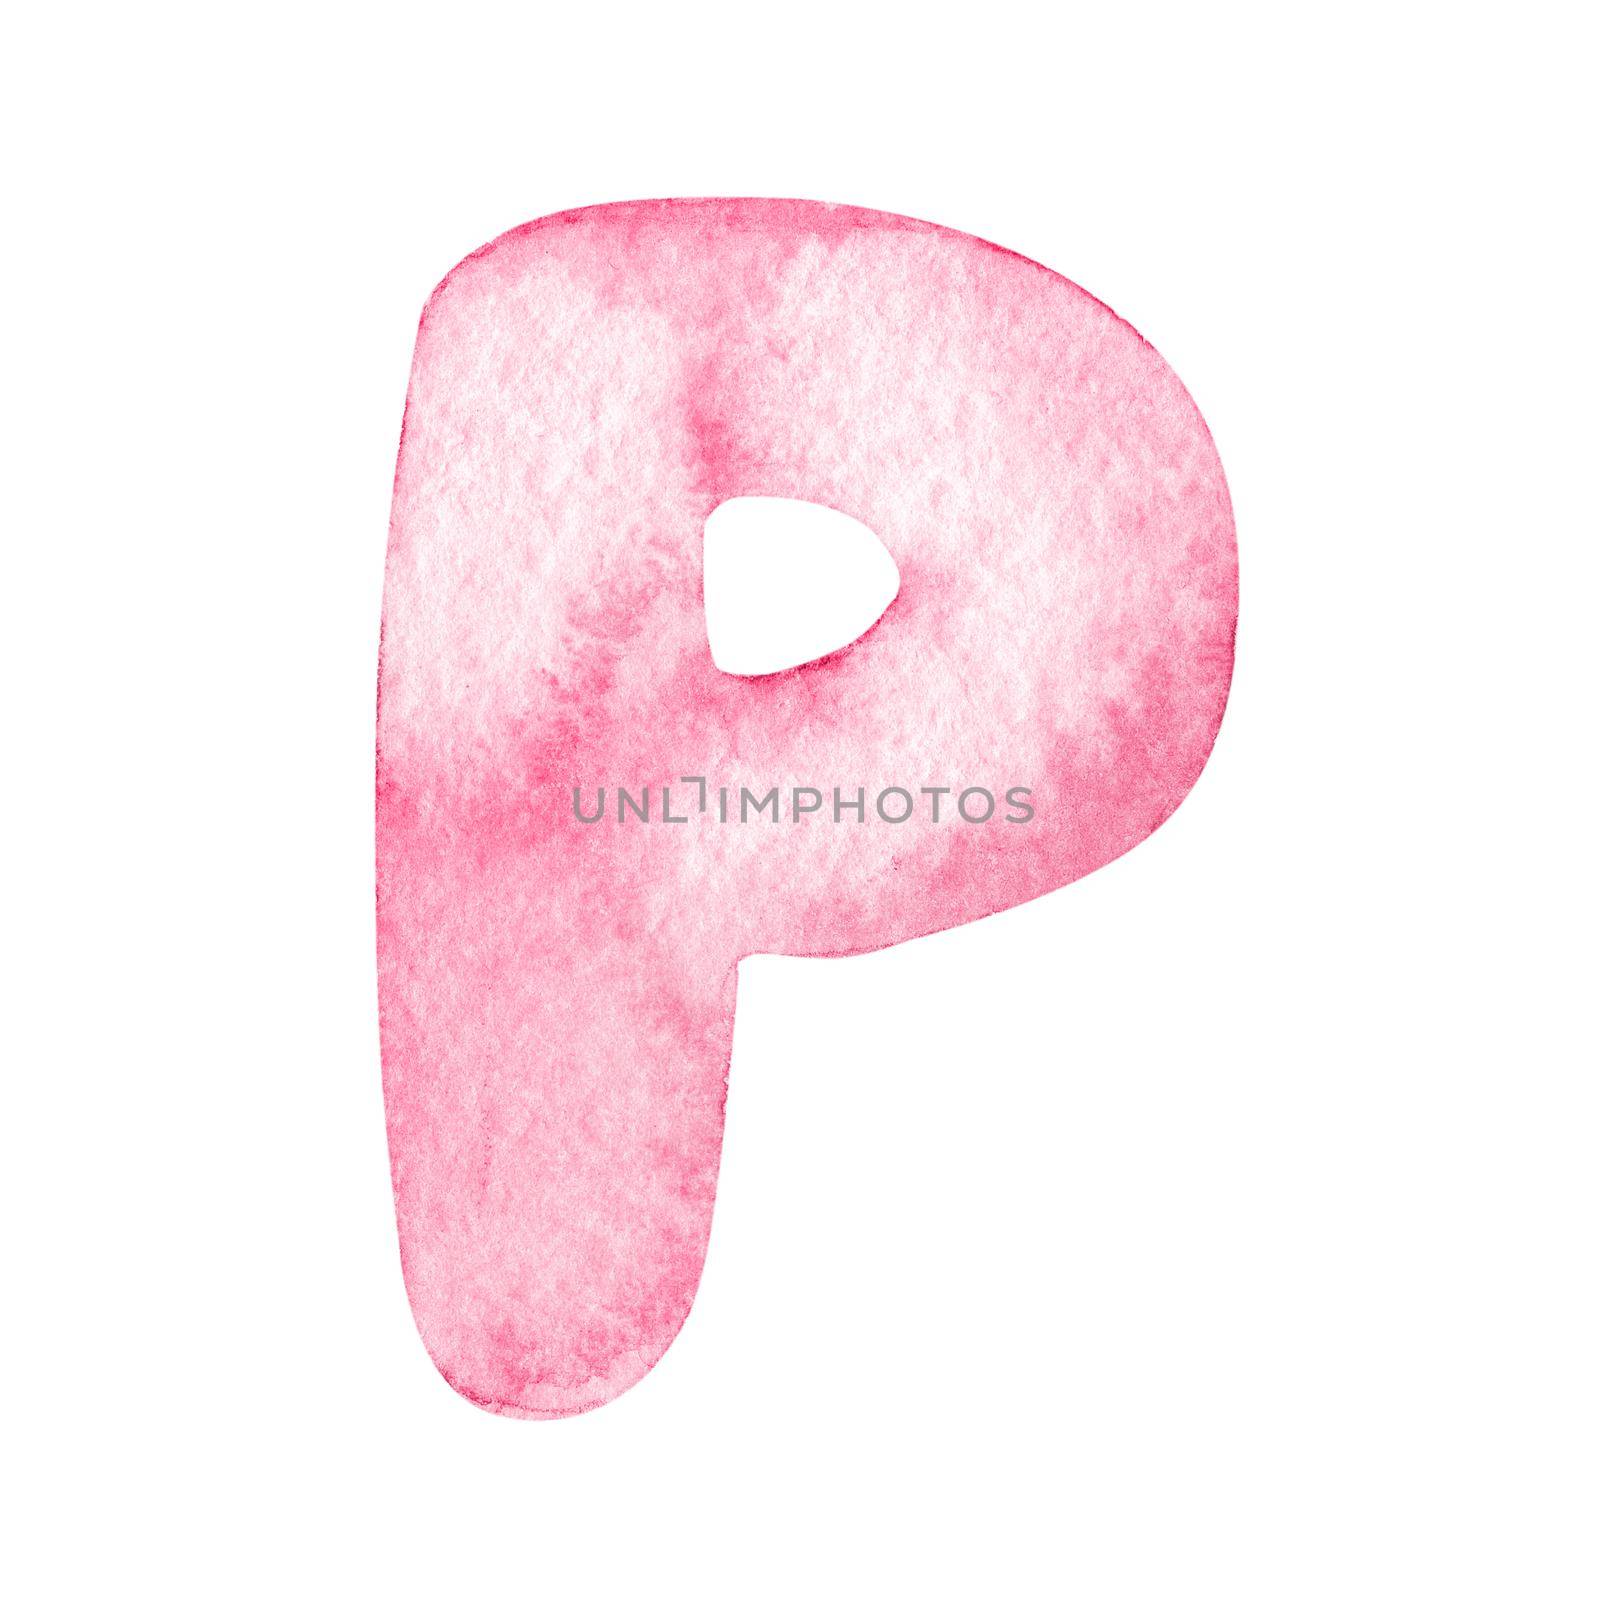 Watercolor pink letter p isolated on white background